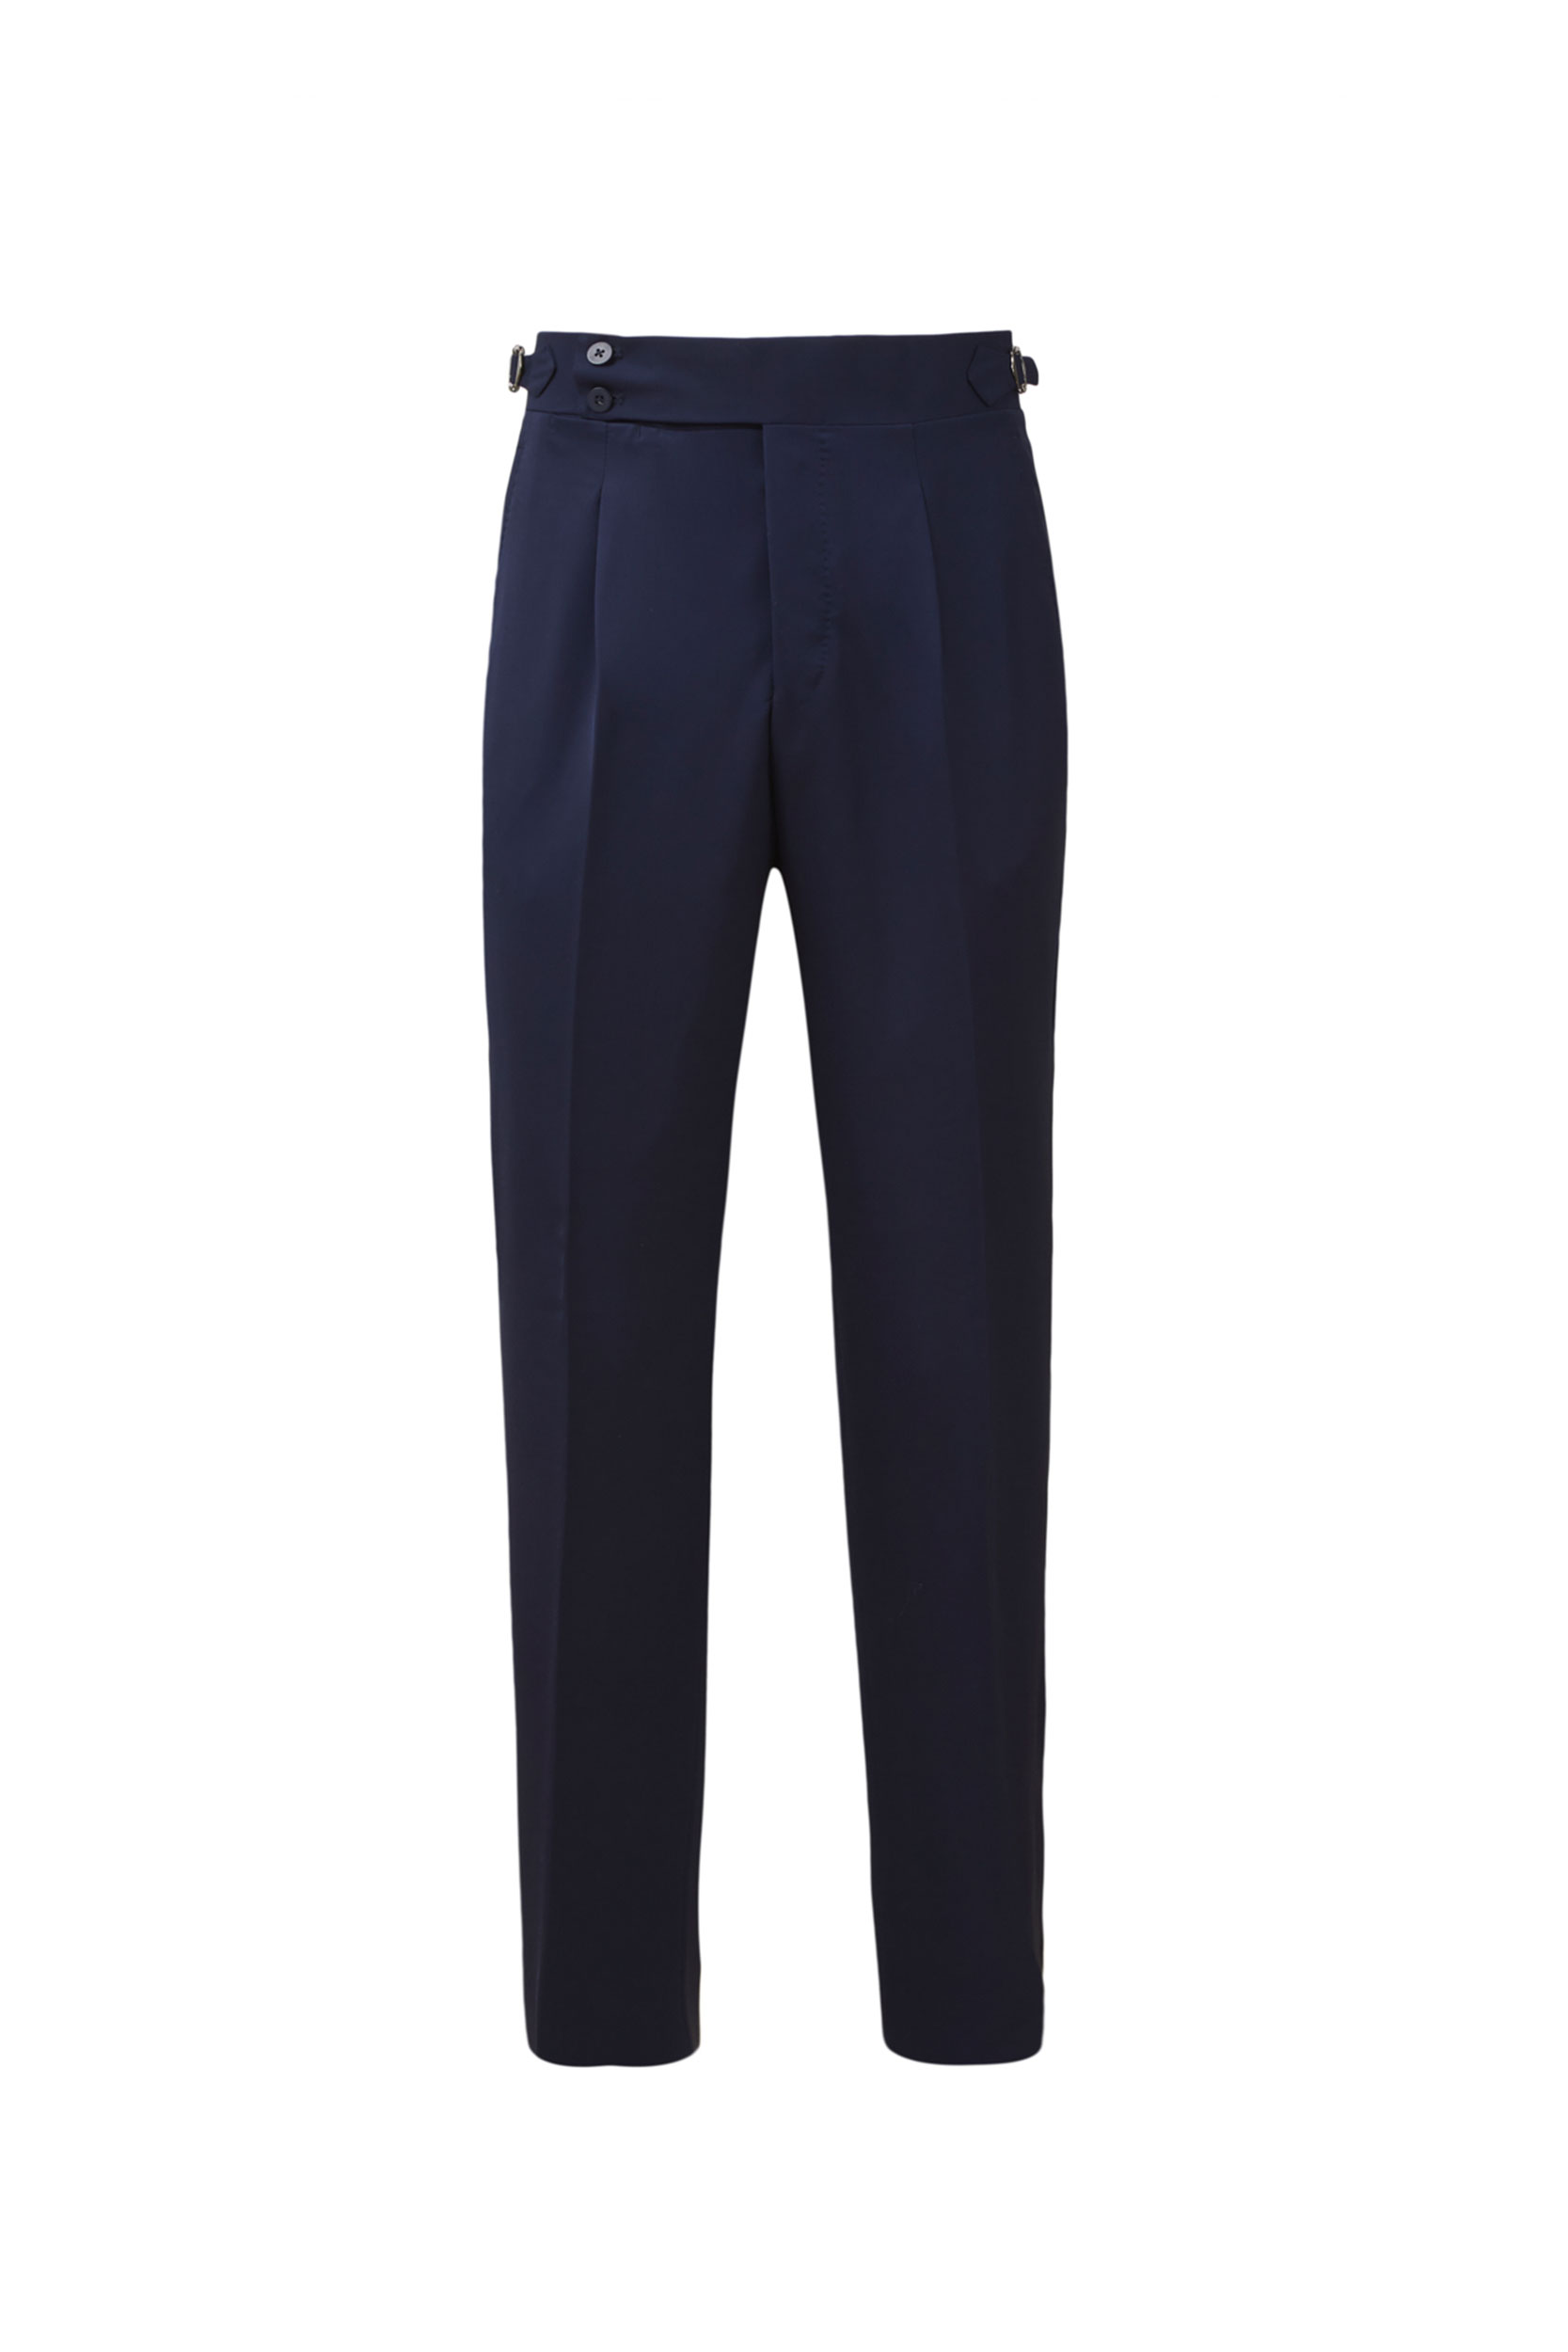 Alberto Dark Blue Double Breasted Suit Jacket + Clyde Trousers - Barbanera